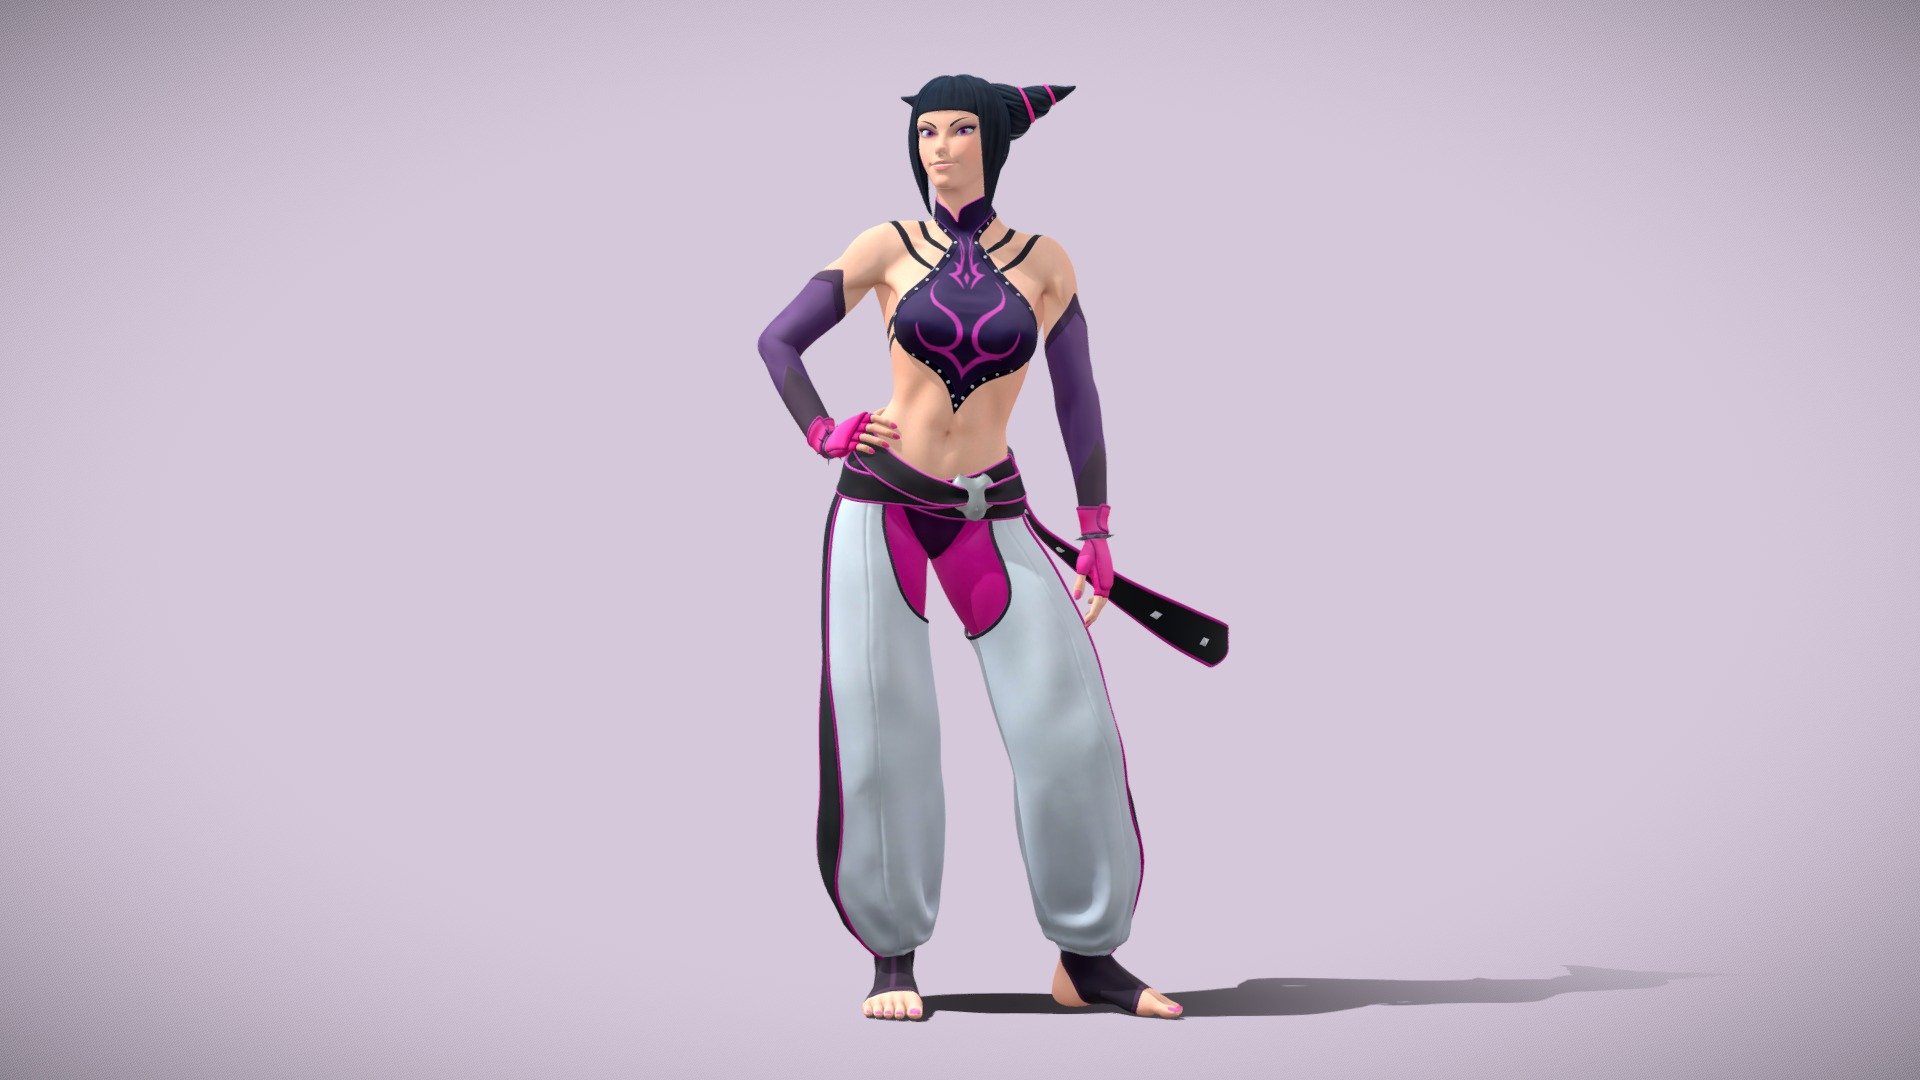 Juri, from the Street Fighter series! If you wanna see some more renders of the model you can check out my artstation here: https://www.artstation.com/artwork/VyvN9N

Felt like trying some more stylized character modelling and painting, hope you like it.
Made with blender, zbrush and substance painter 3d model